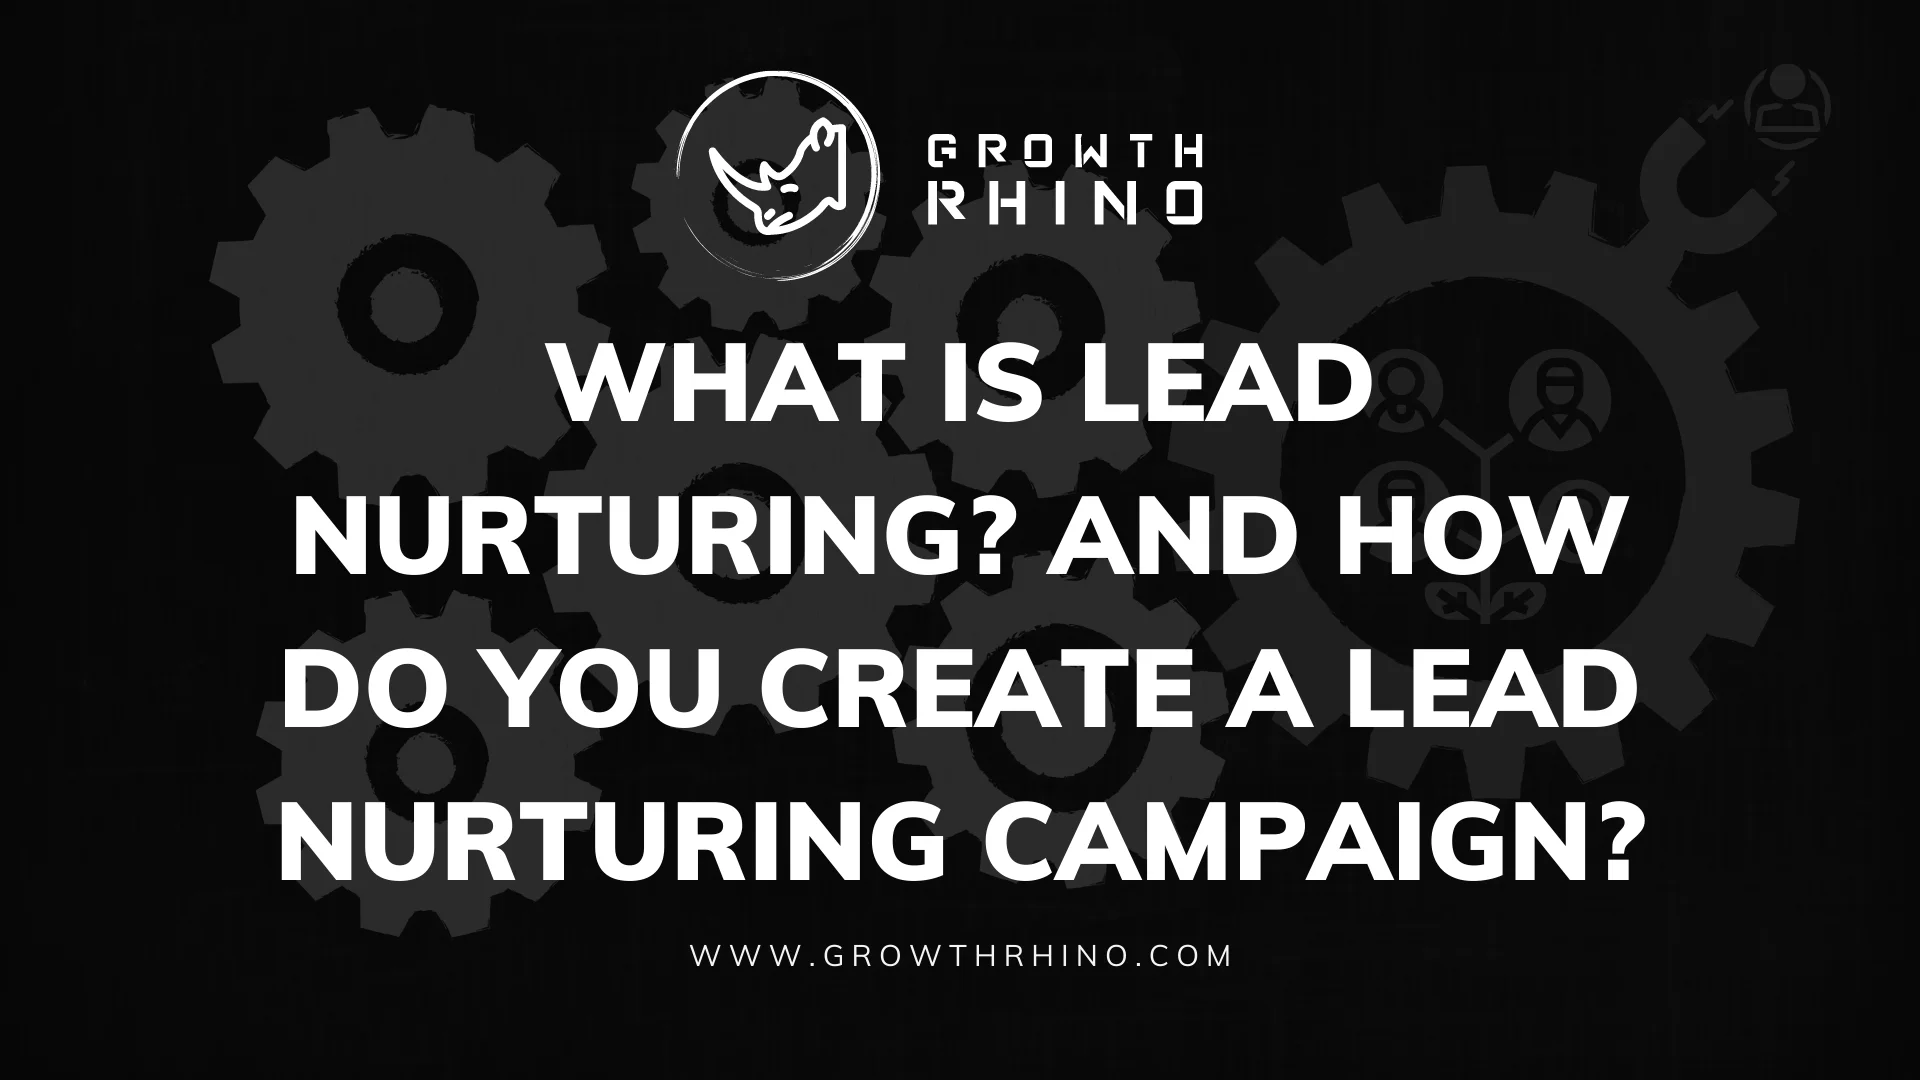 What Is Lead Nurturing? And How Do You Create a Lead Nurturing Campaign? 